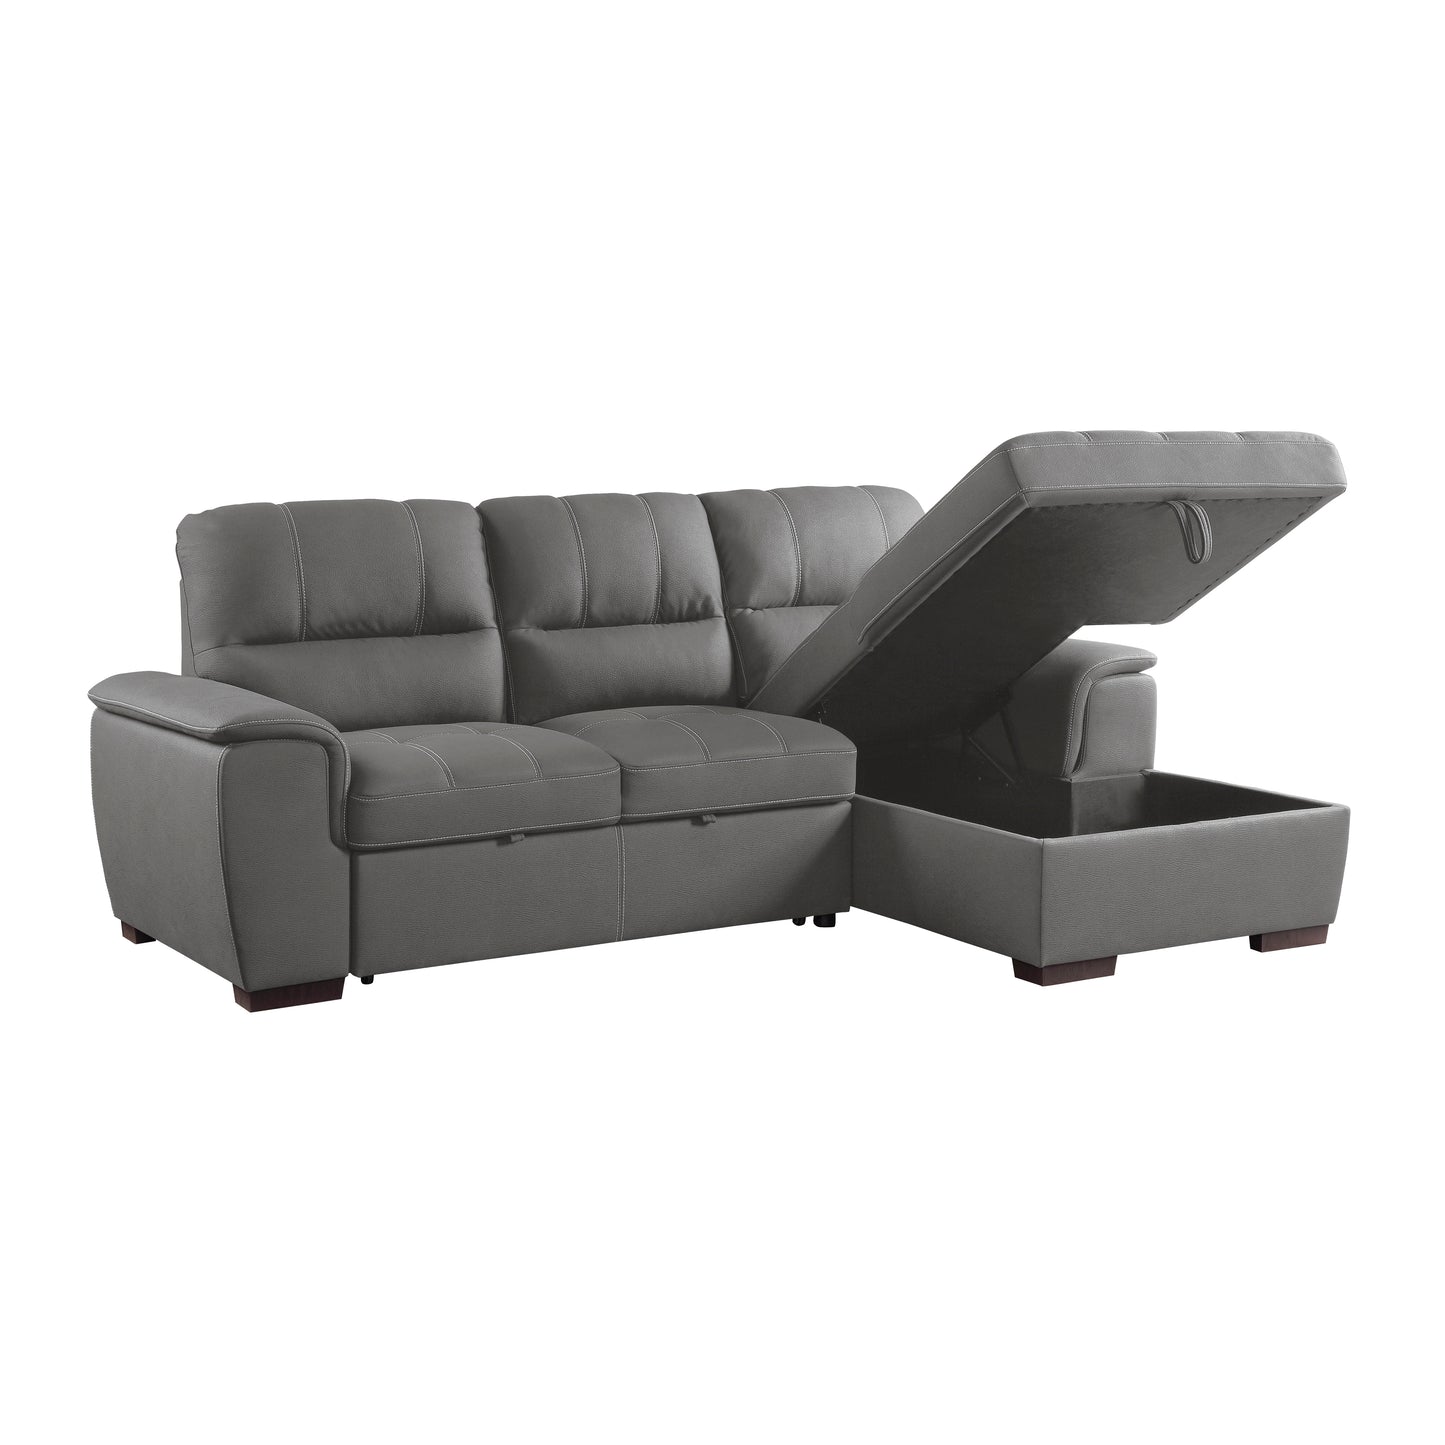 Andes 2-Pcs Sectional w/ Pull-out Bed & RAF ONLY w/ Hidden Storage GREY